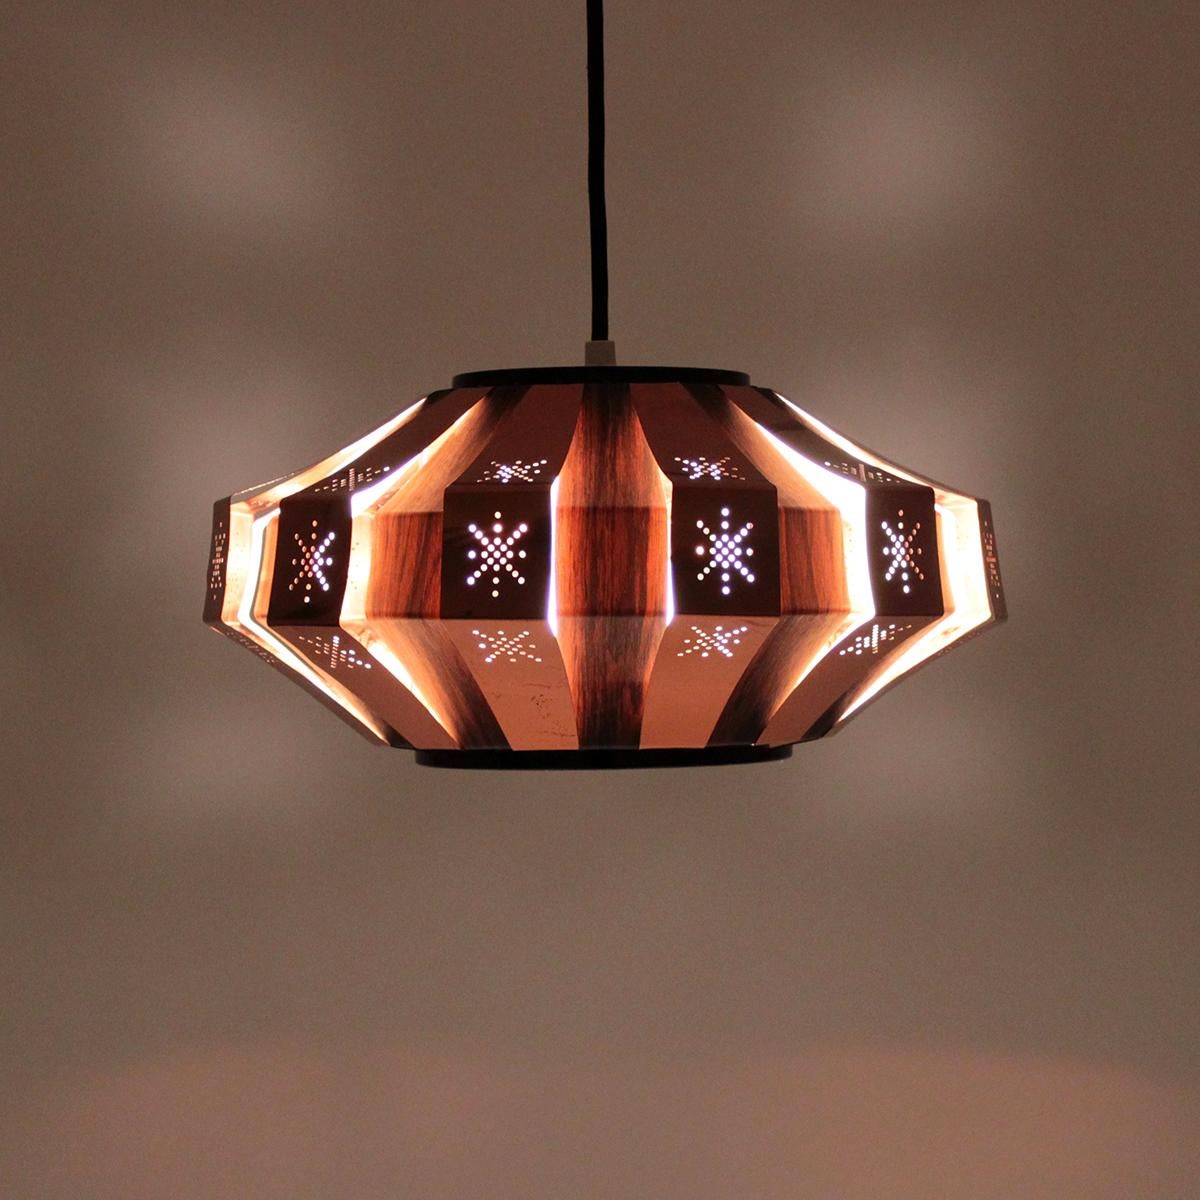 Copper pendant by Werner Schou, produced by Coronell in the 1970s - copper and faux rosewood hanging lamp in very good vintage condition!

A medium sized pendant, comprised of thin aluminium strips - arranged in two layers offset to each other.